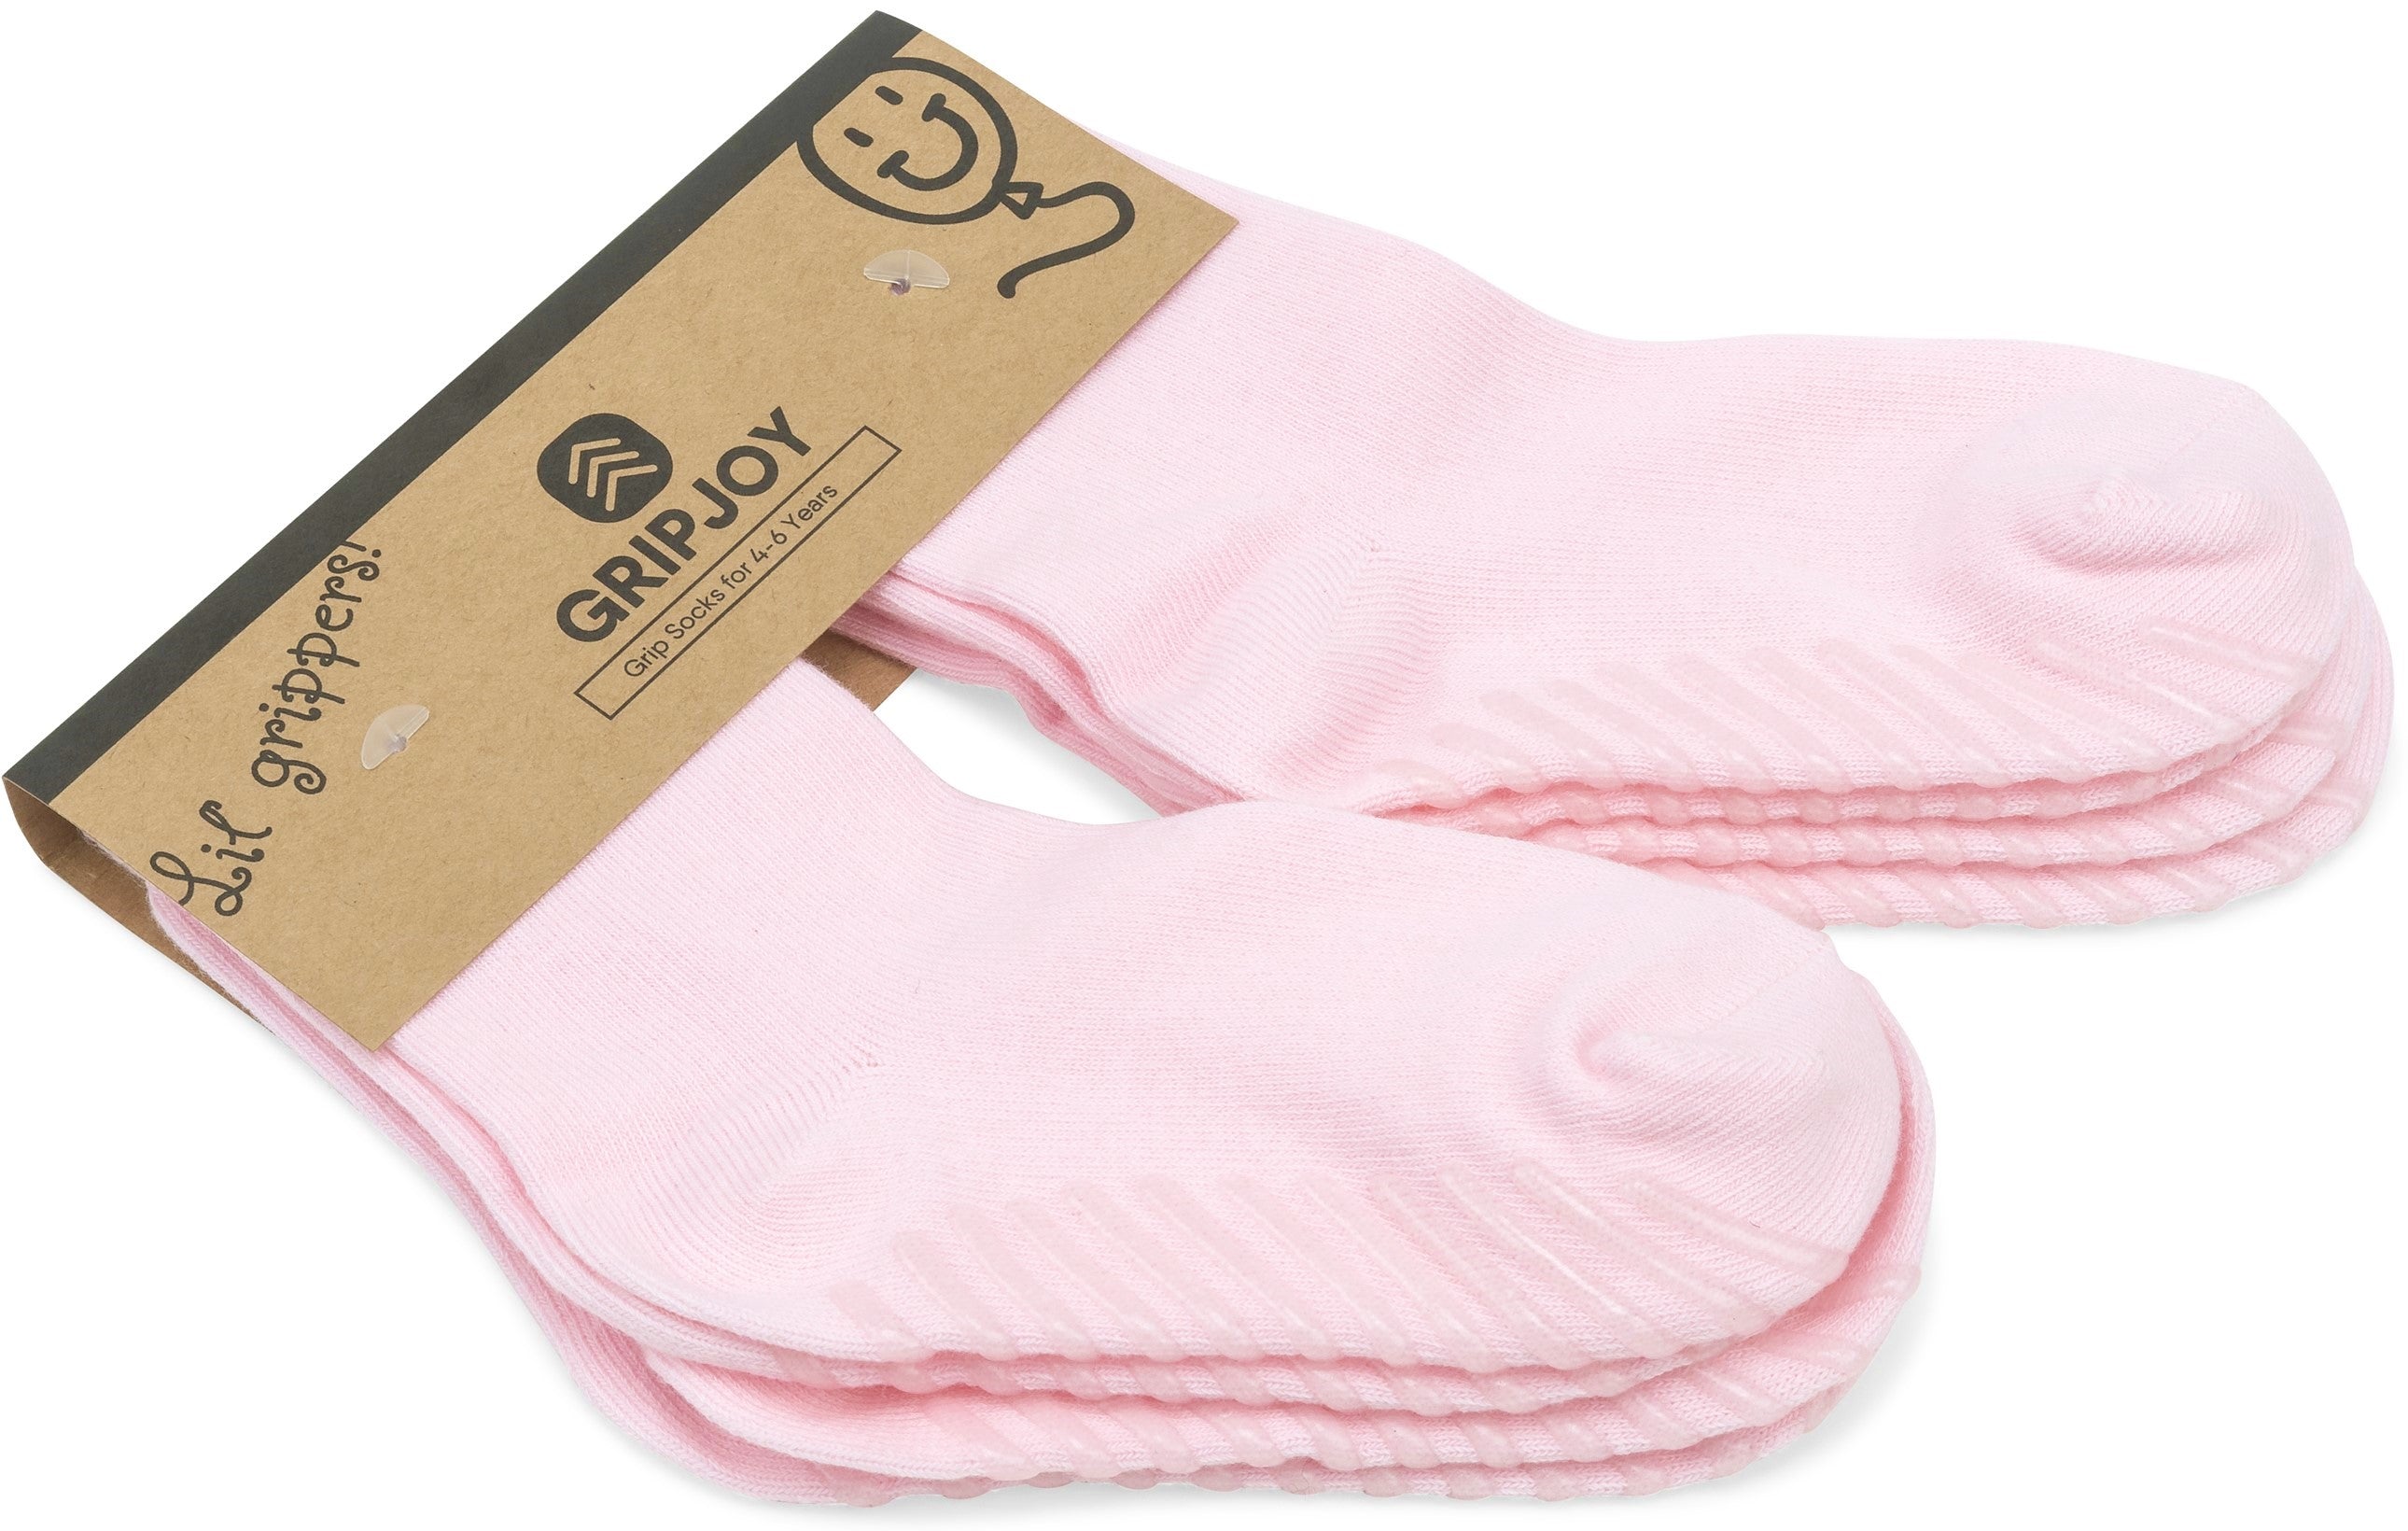 Pink Grip Socks for Toddlers & Kids - 4 pairs